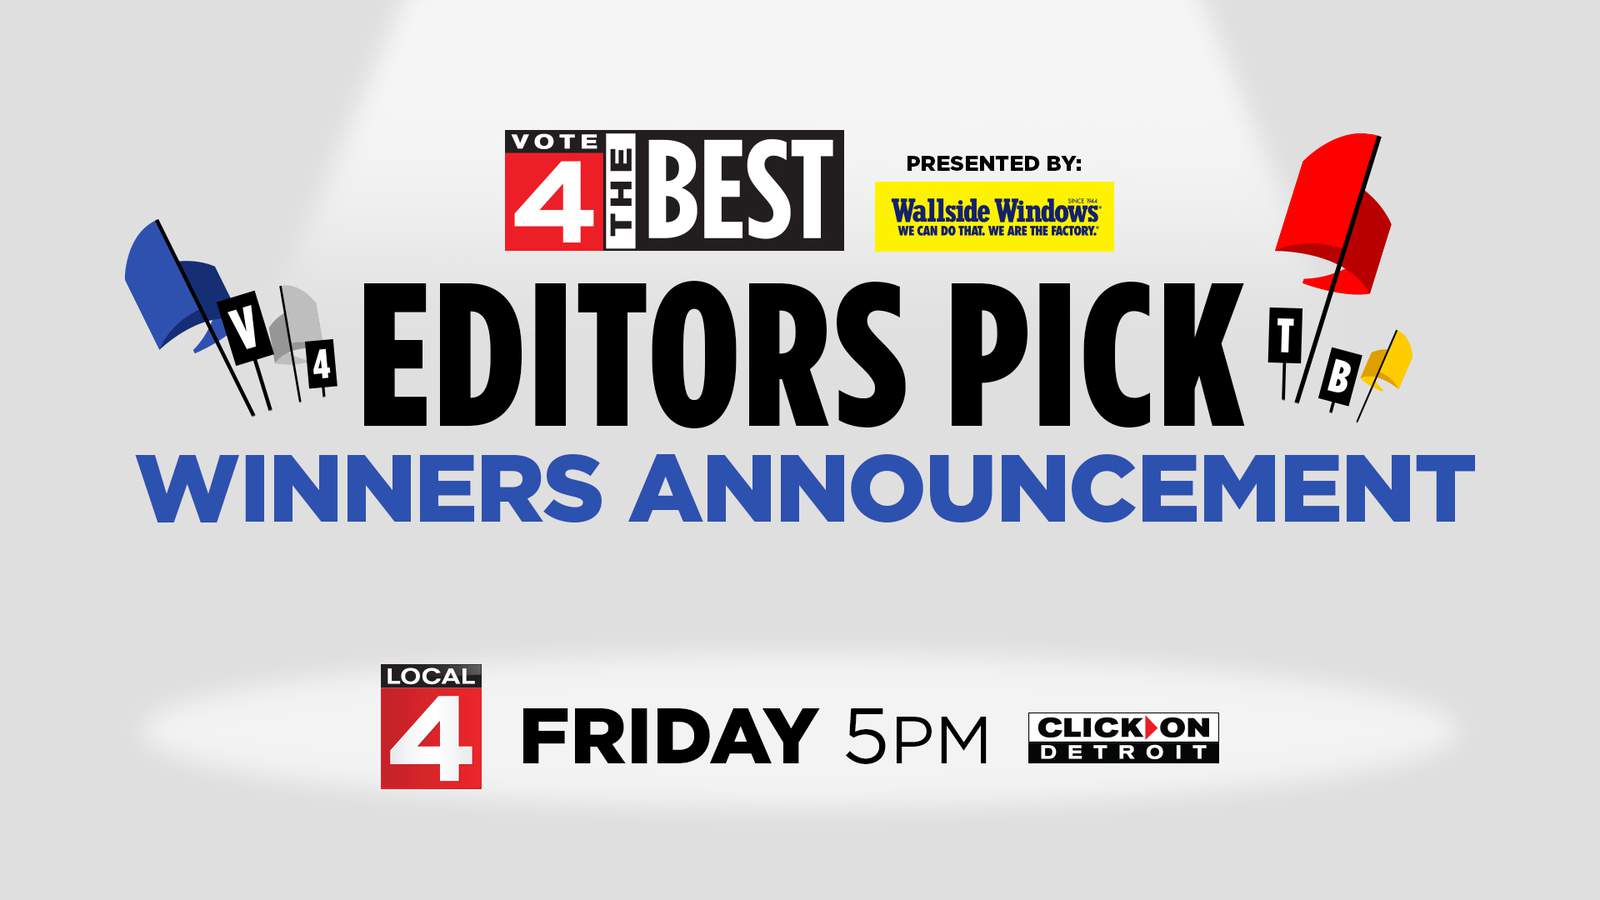 Vote 4 The Best: ‘Editors Pick’ Winners Announced Friday